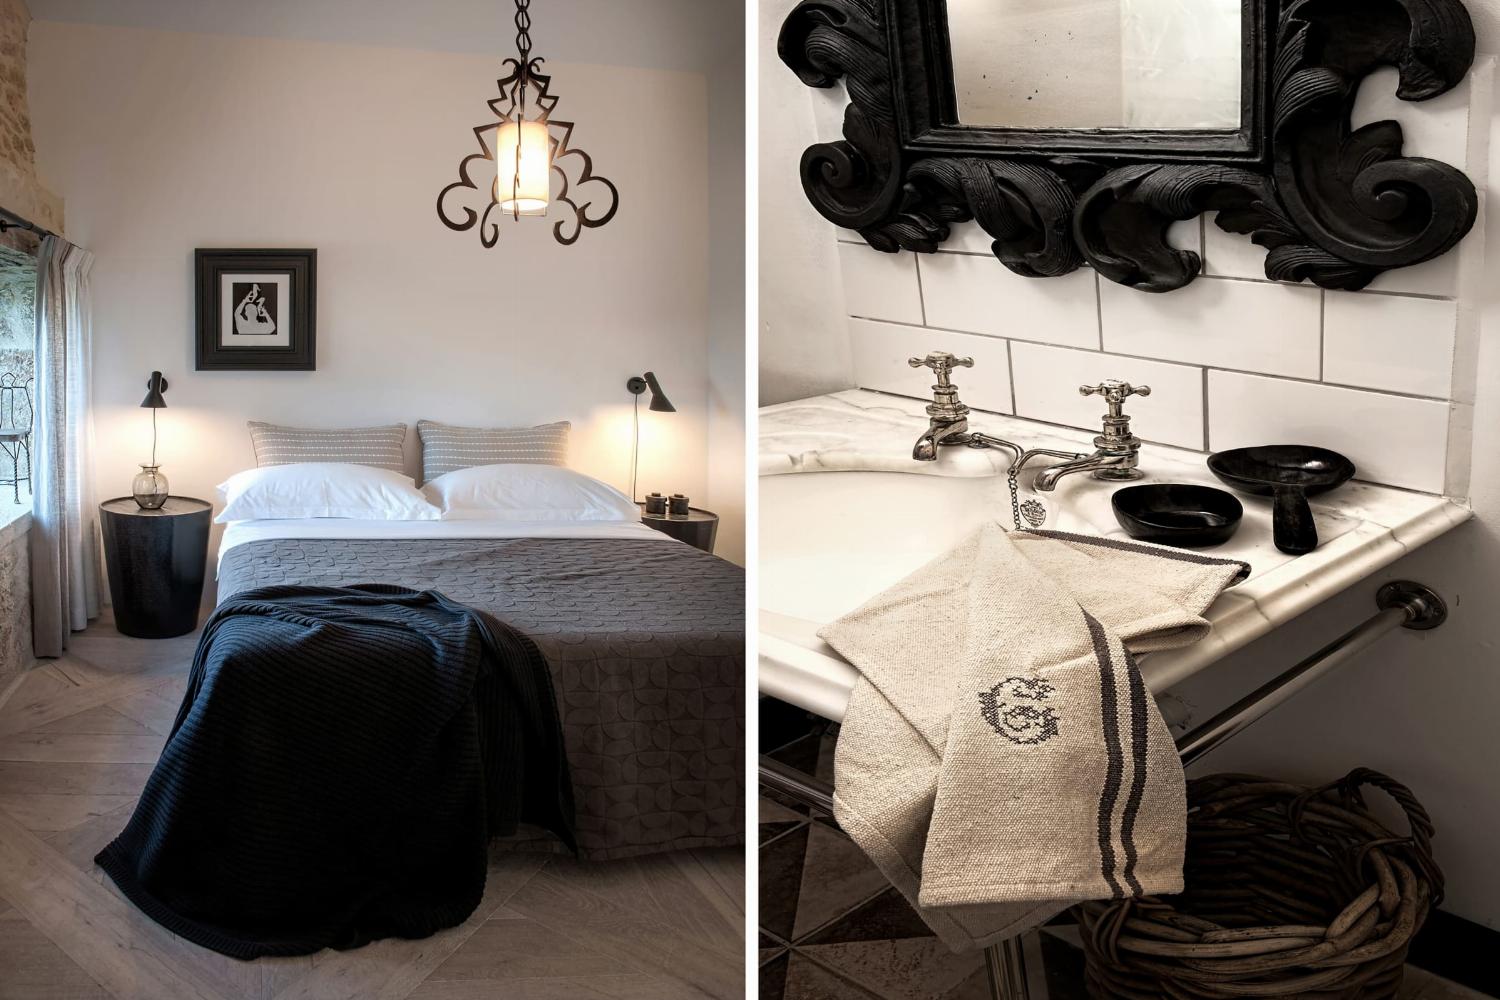 Bedroom and bathroom | Holiday cottage in South West France